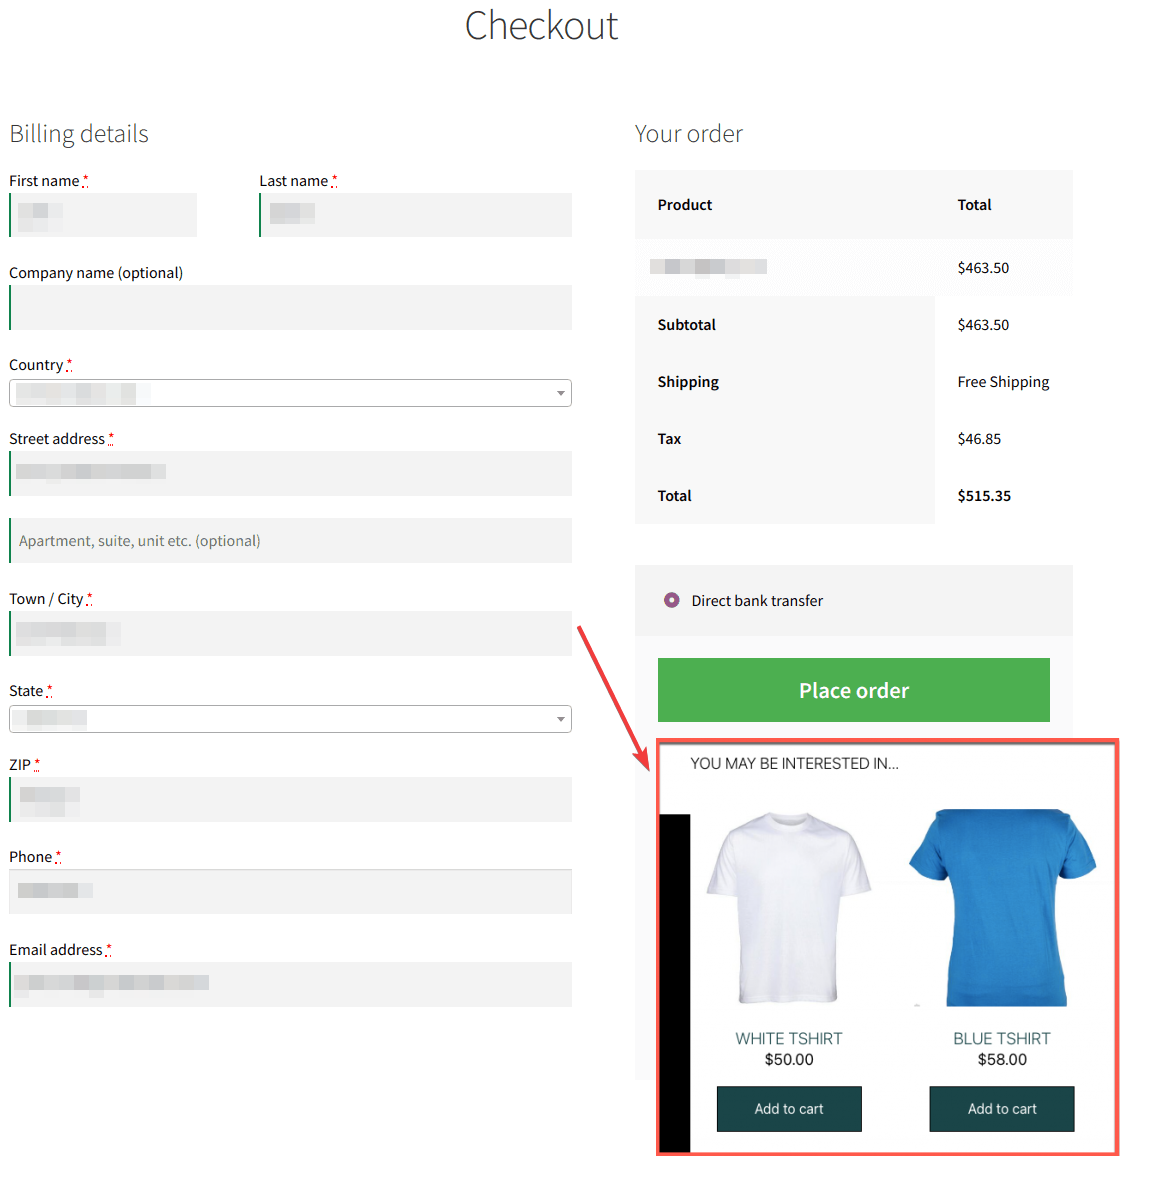 How to Edit WooCommerce Checkout Page (Code + Plugins)